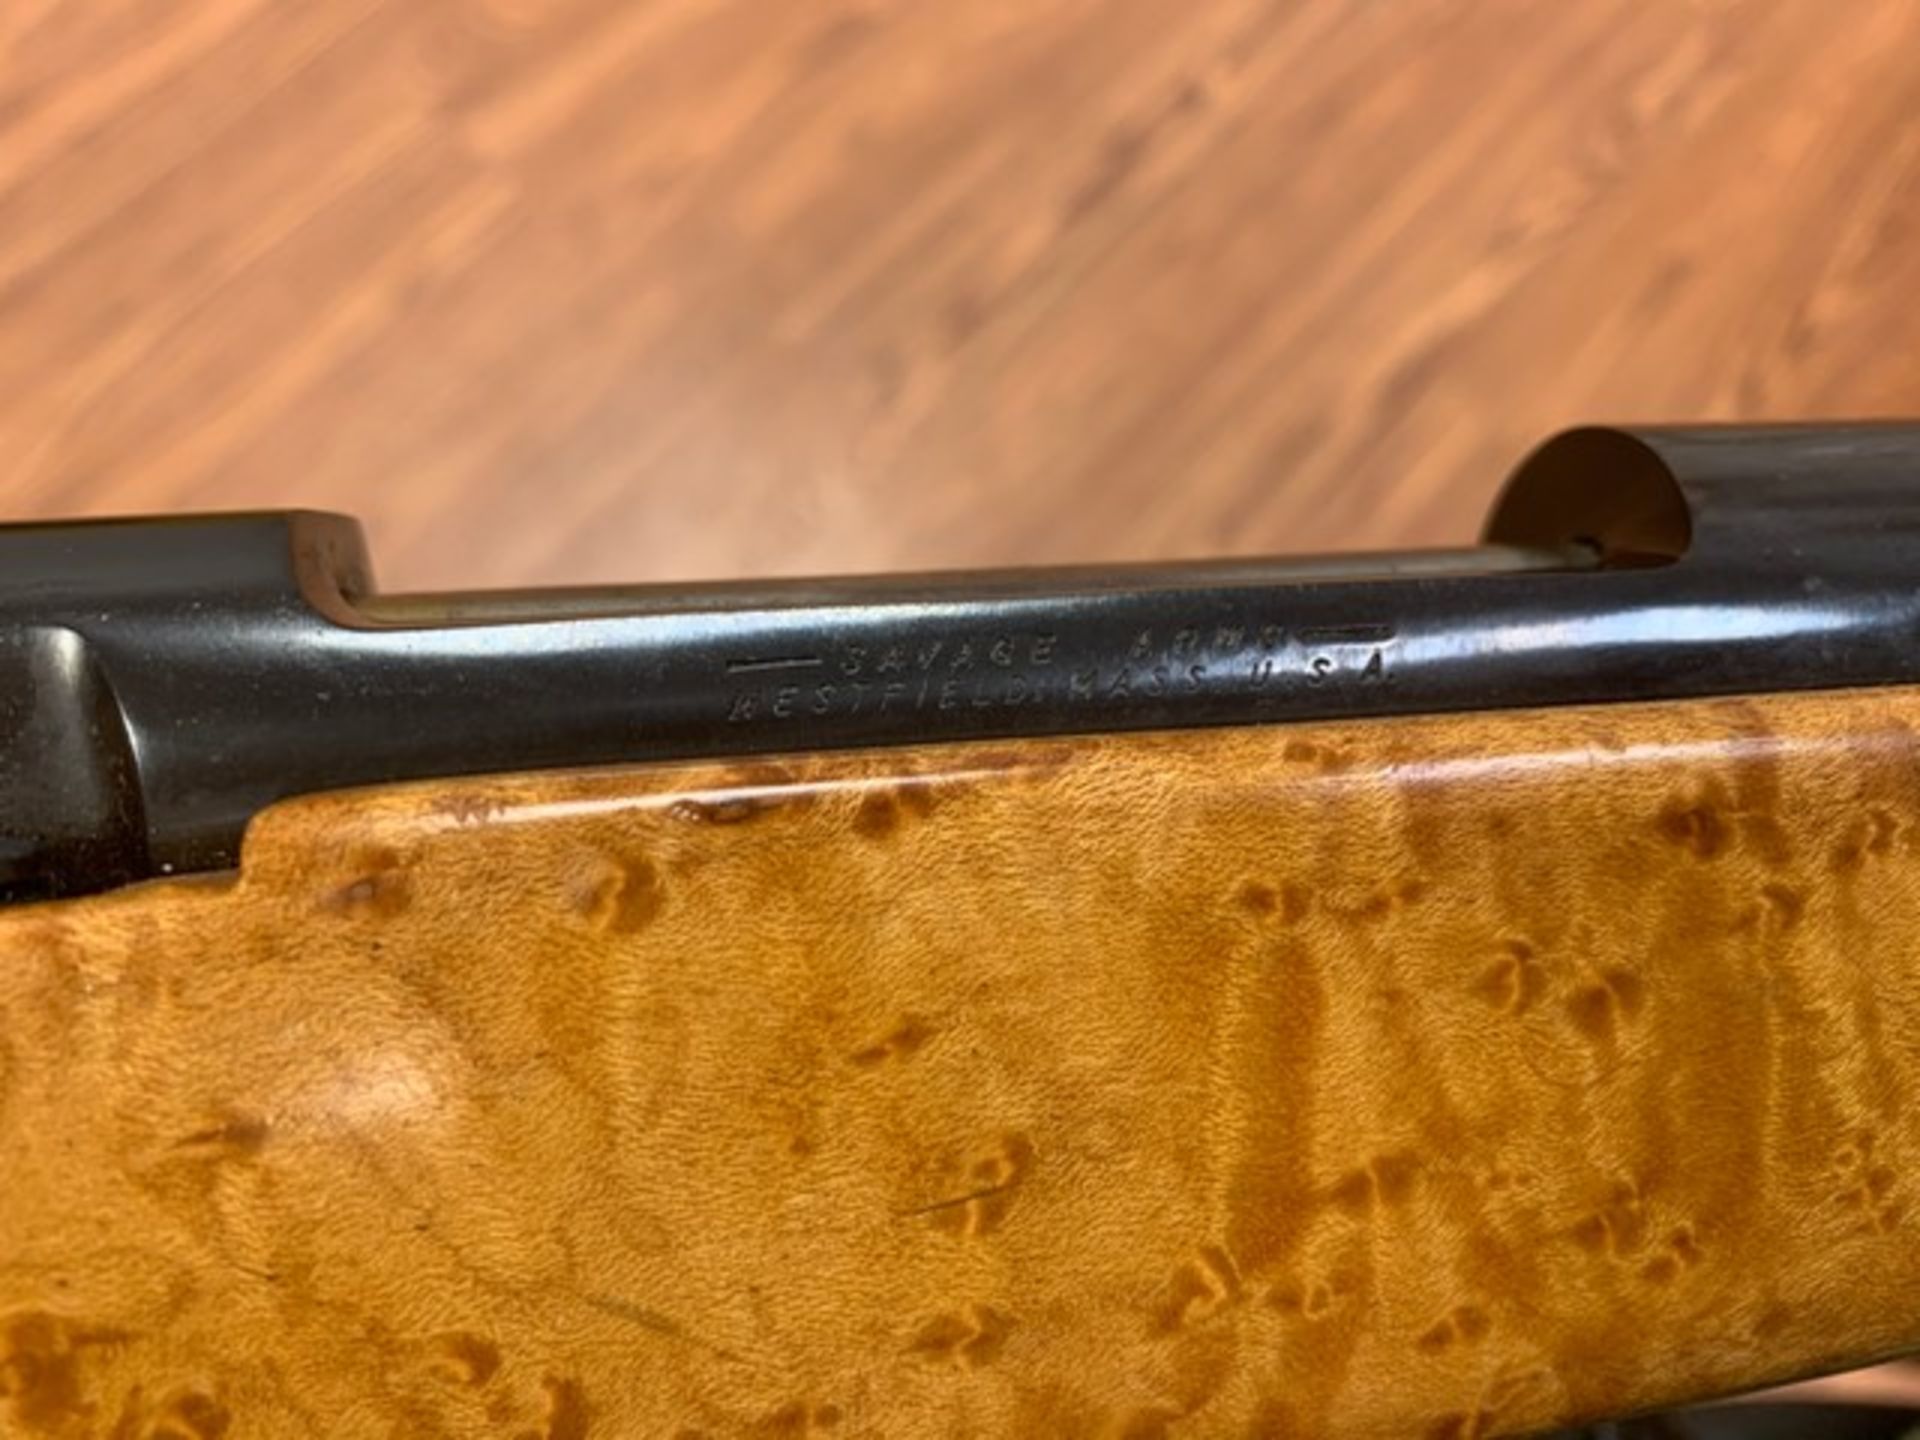 SAVAGE 110L-H PISTOL - 243 WIN - LEFT HAND BOLT ACTION - BIRDS EYE MAPLE (FOB HOLLYWOOD, FL) - Image 5 of 7